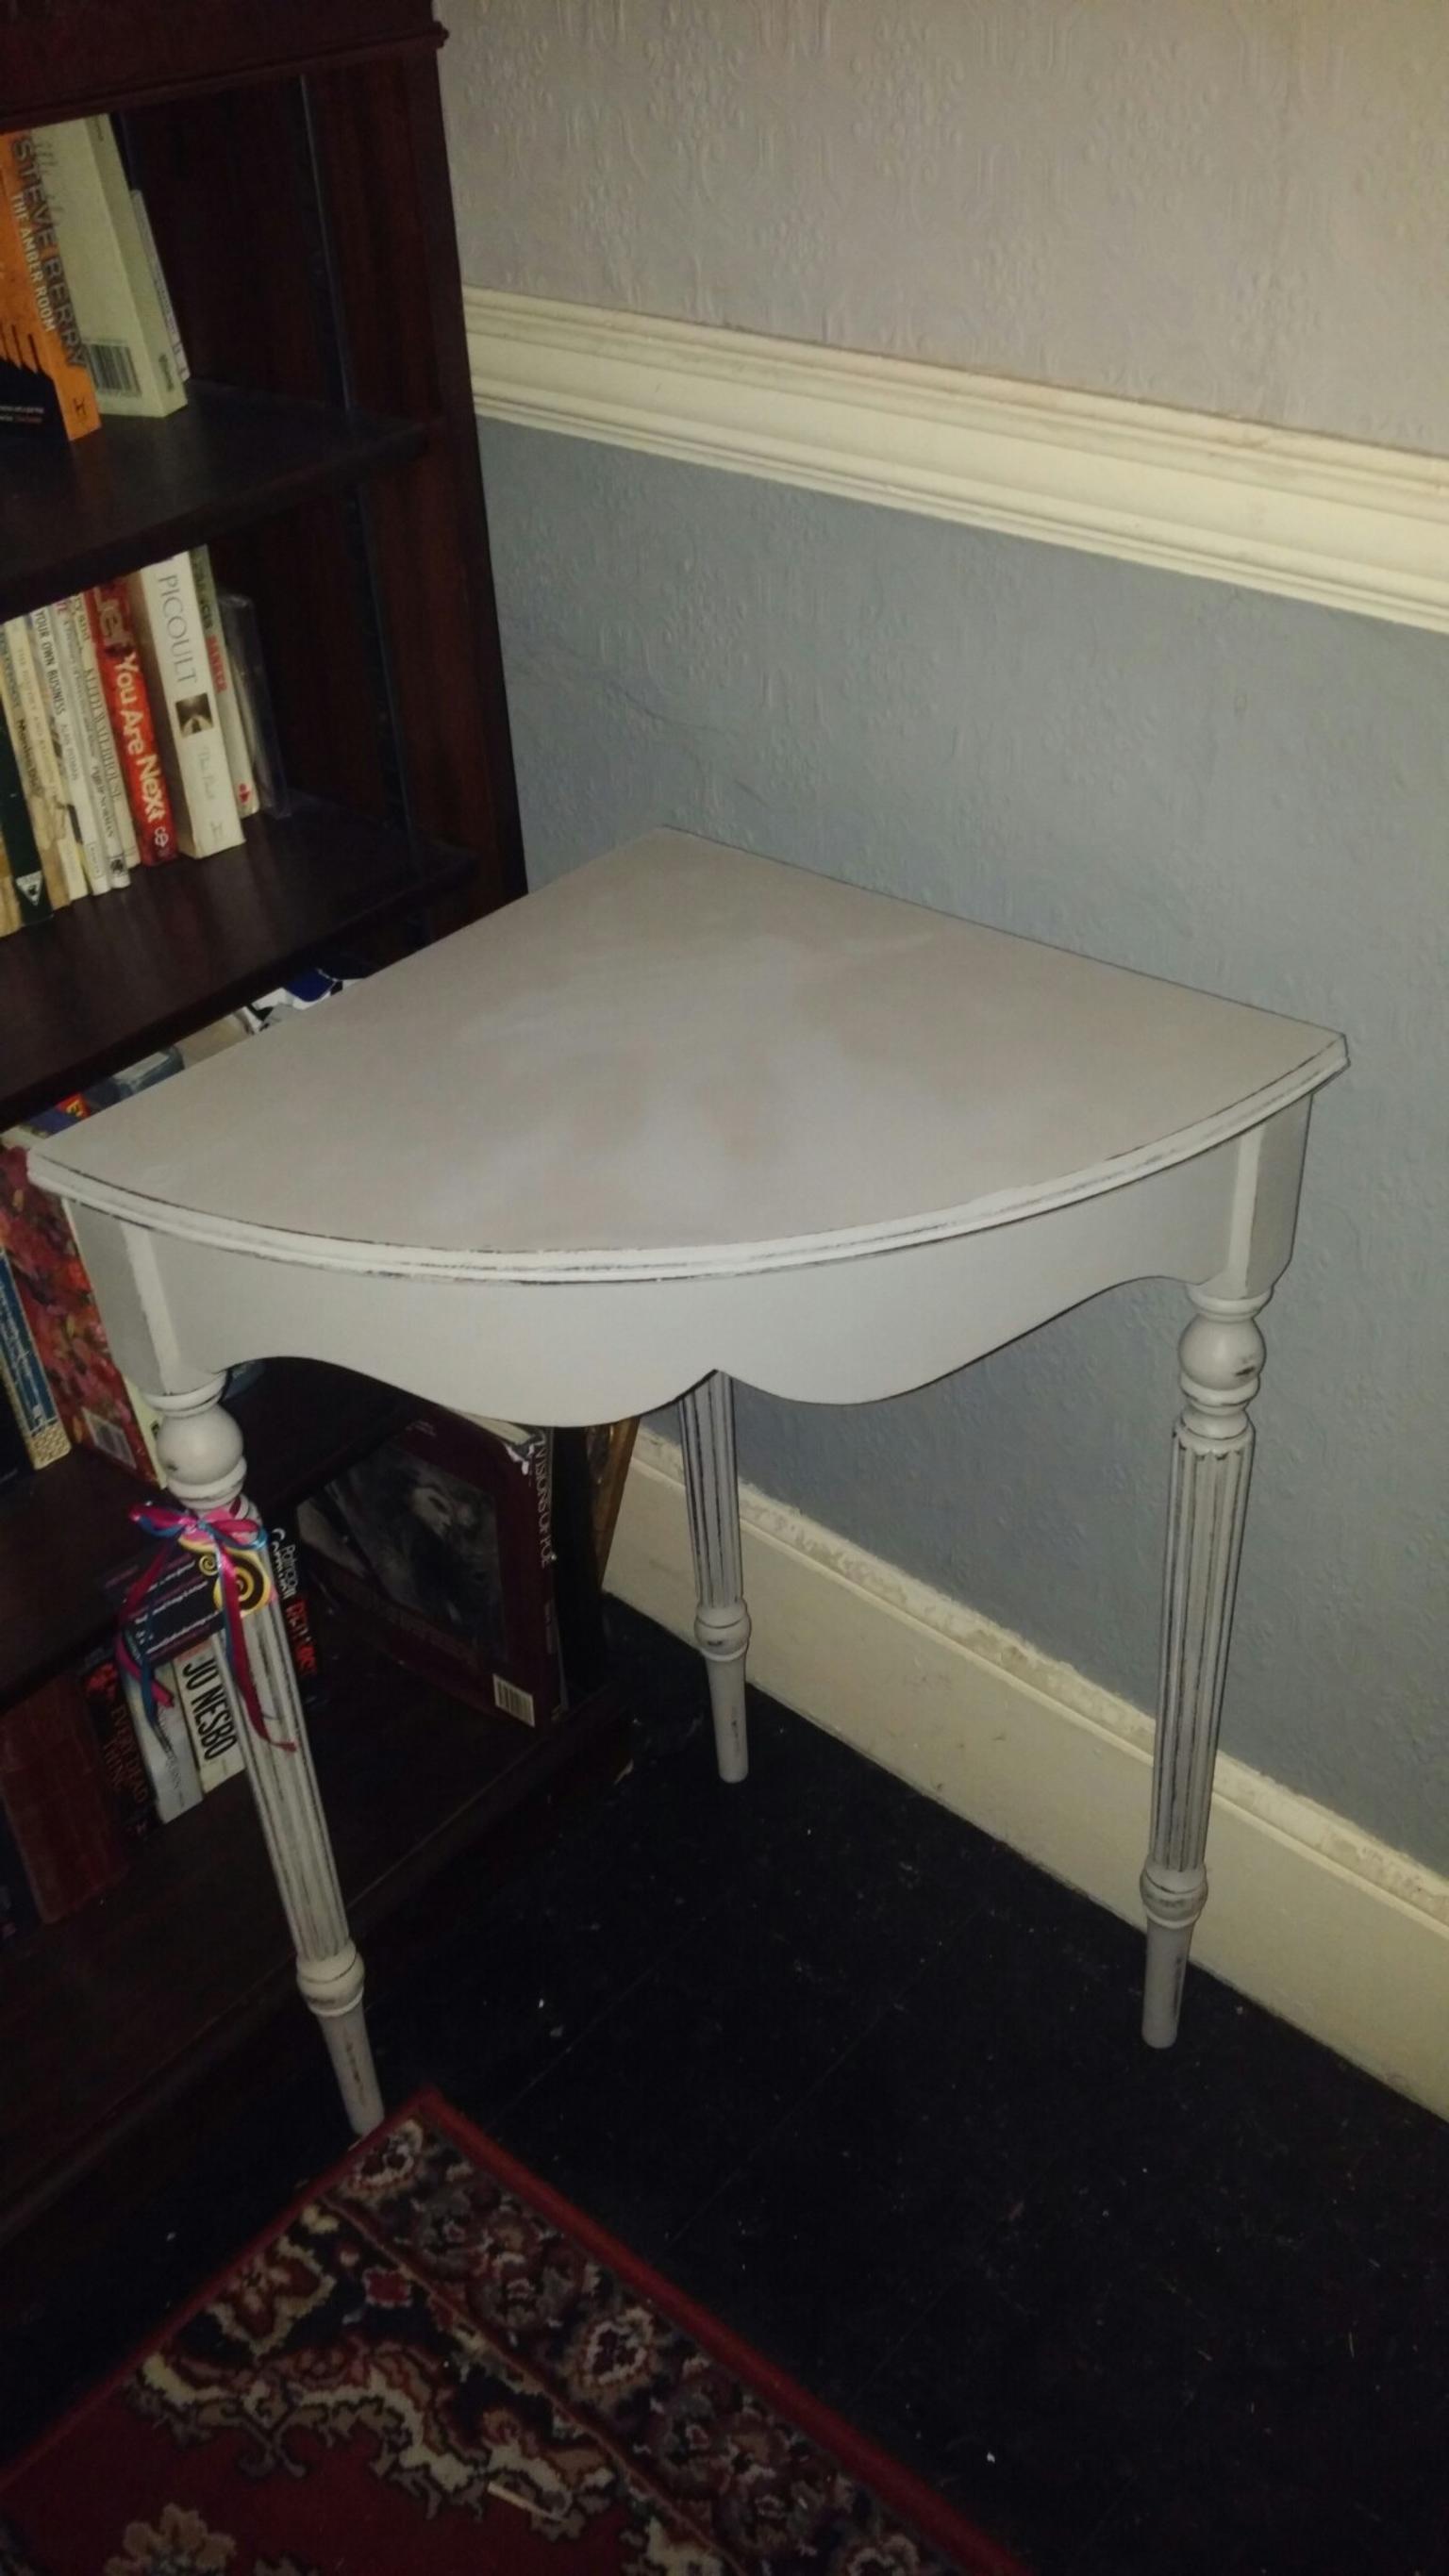 Shabby Chic Corner Table In Ch43 Birkenhead For 45 00 For Sale